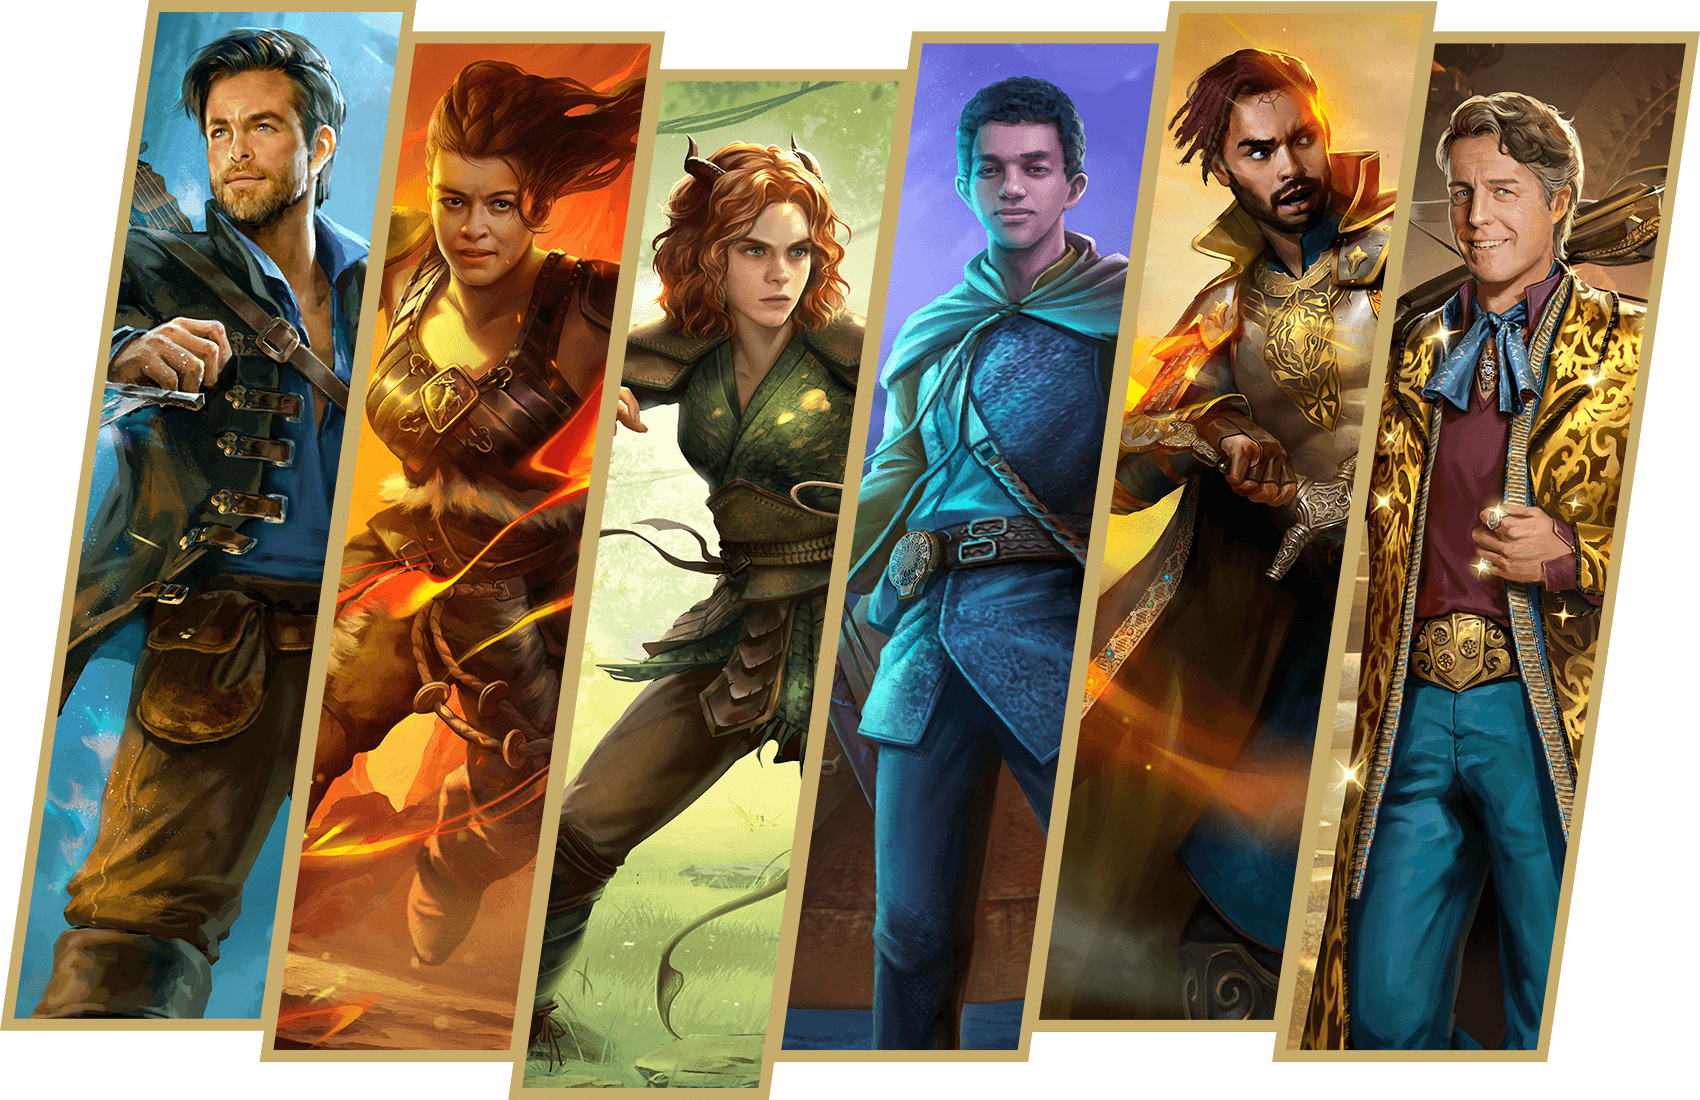 six fantasy illustrations. in order: a charming bard played by chris pine; a warrior woman played by michelle rodriguez; a young tiefling druid played by sophia lillis; a sorcerer played by justice smith; a paladin played by rege jean page; and a smirking rogue played by hugh grant